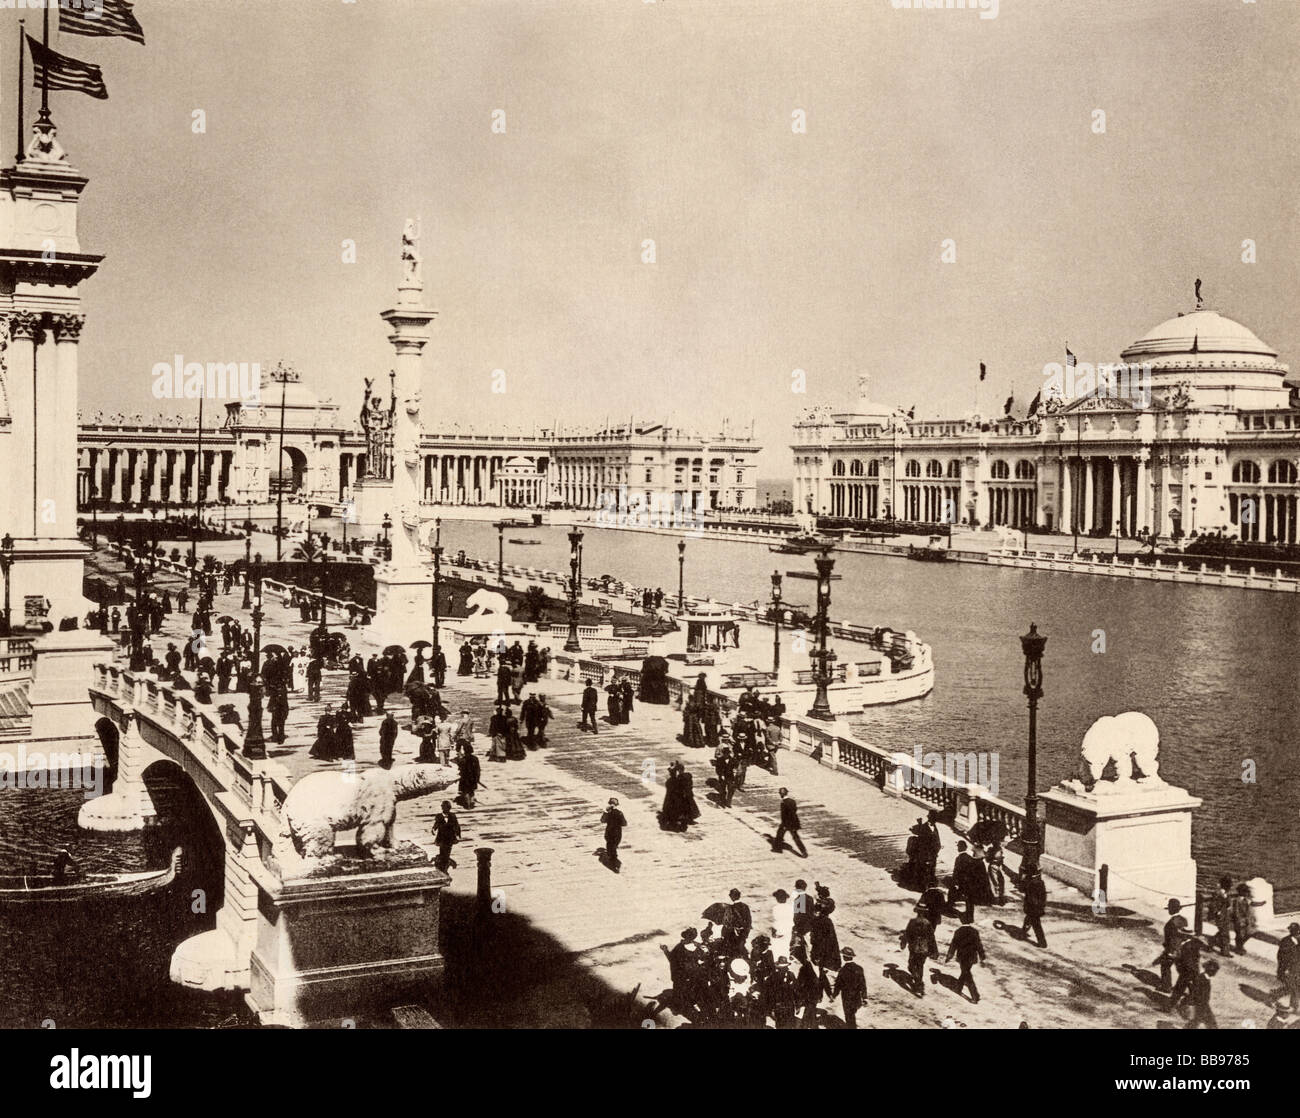 Court of Honor and central basin of the Columbian Exposition Chicago 1893. Albertype (photograph) Stock Photo